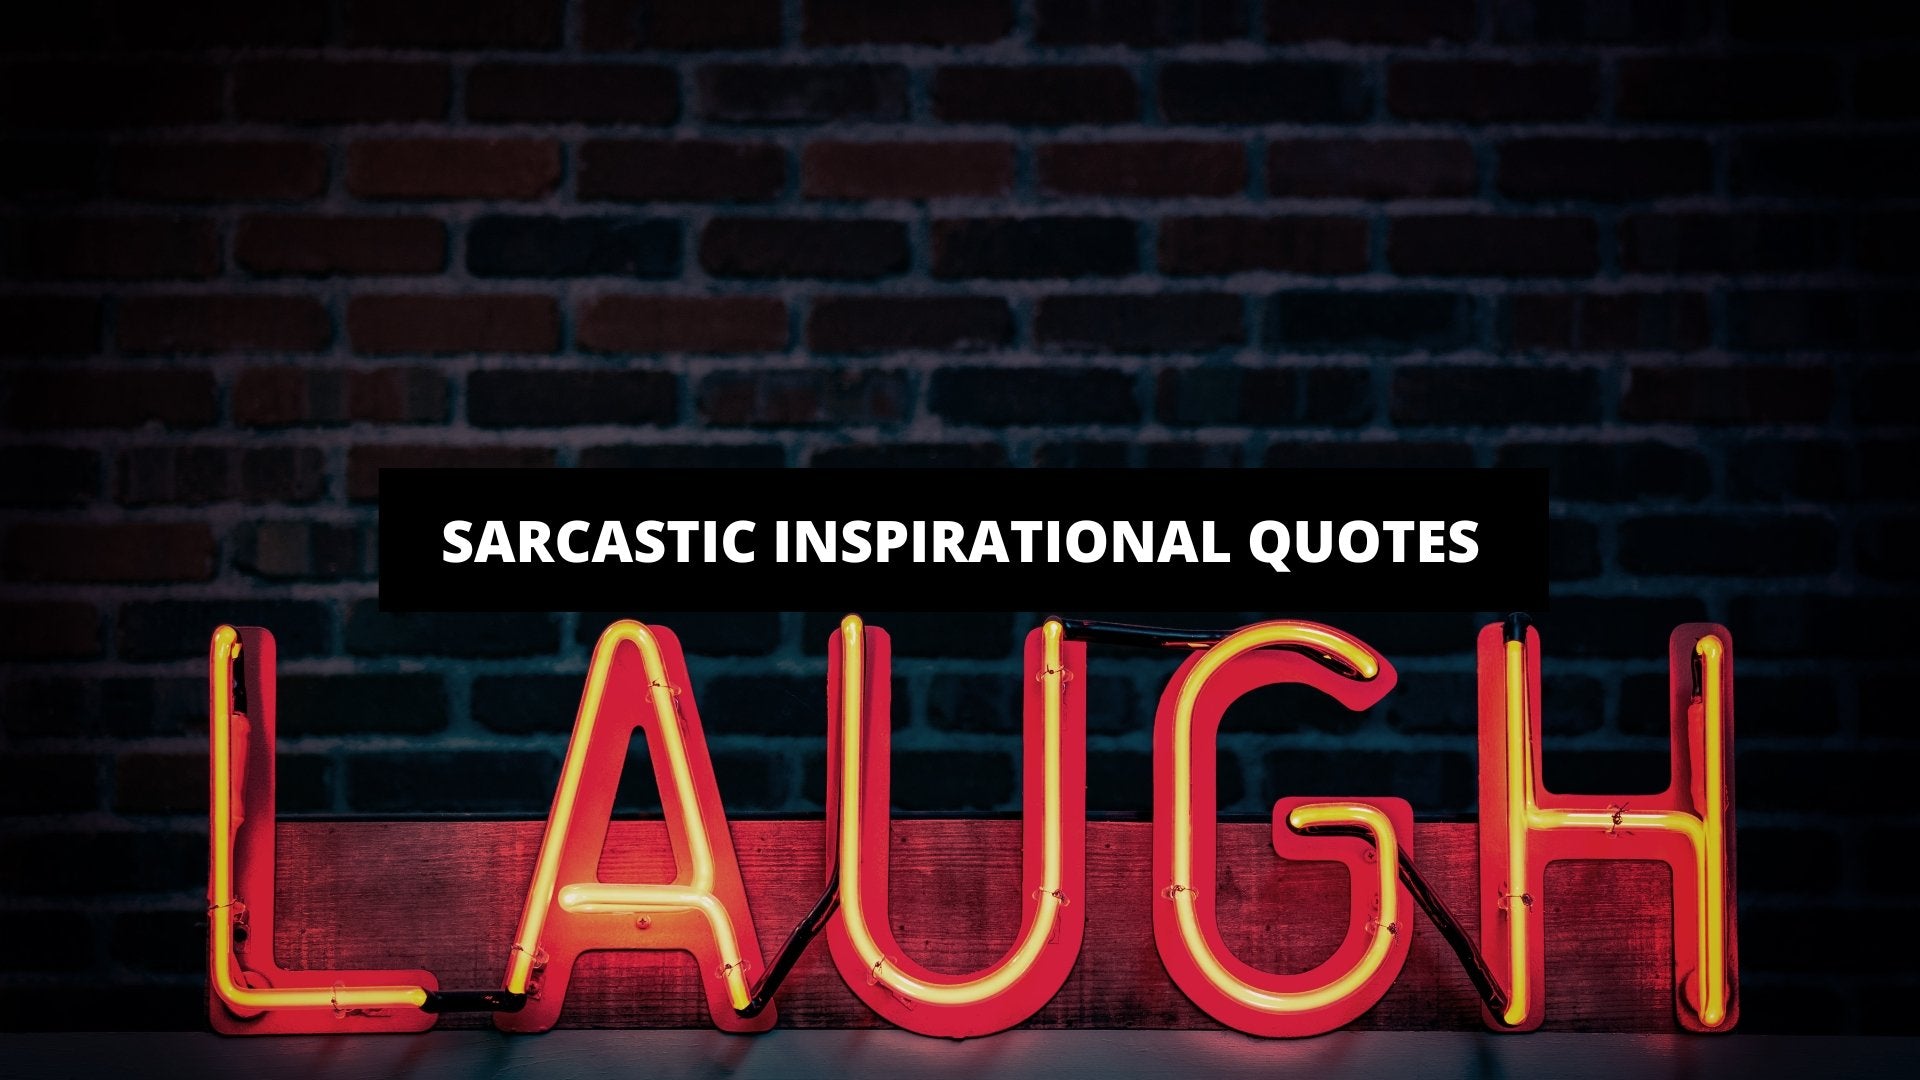 Sarcastic Inspirational Quotes - The Trendy Art